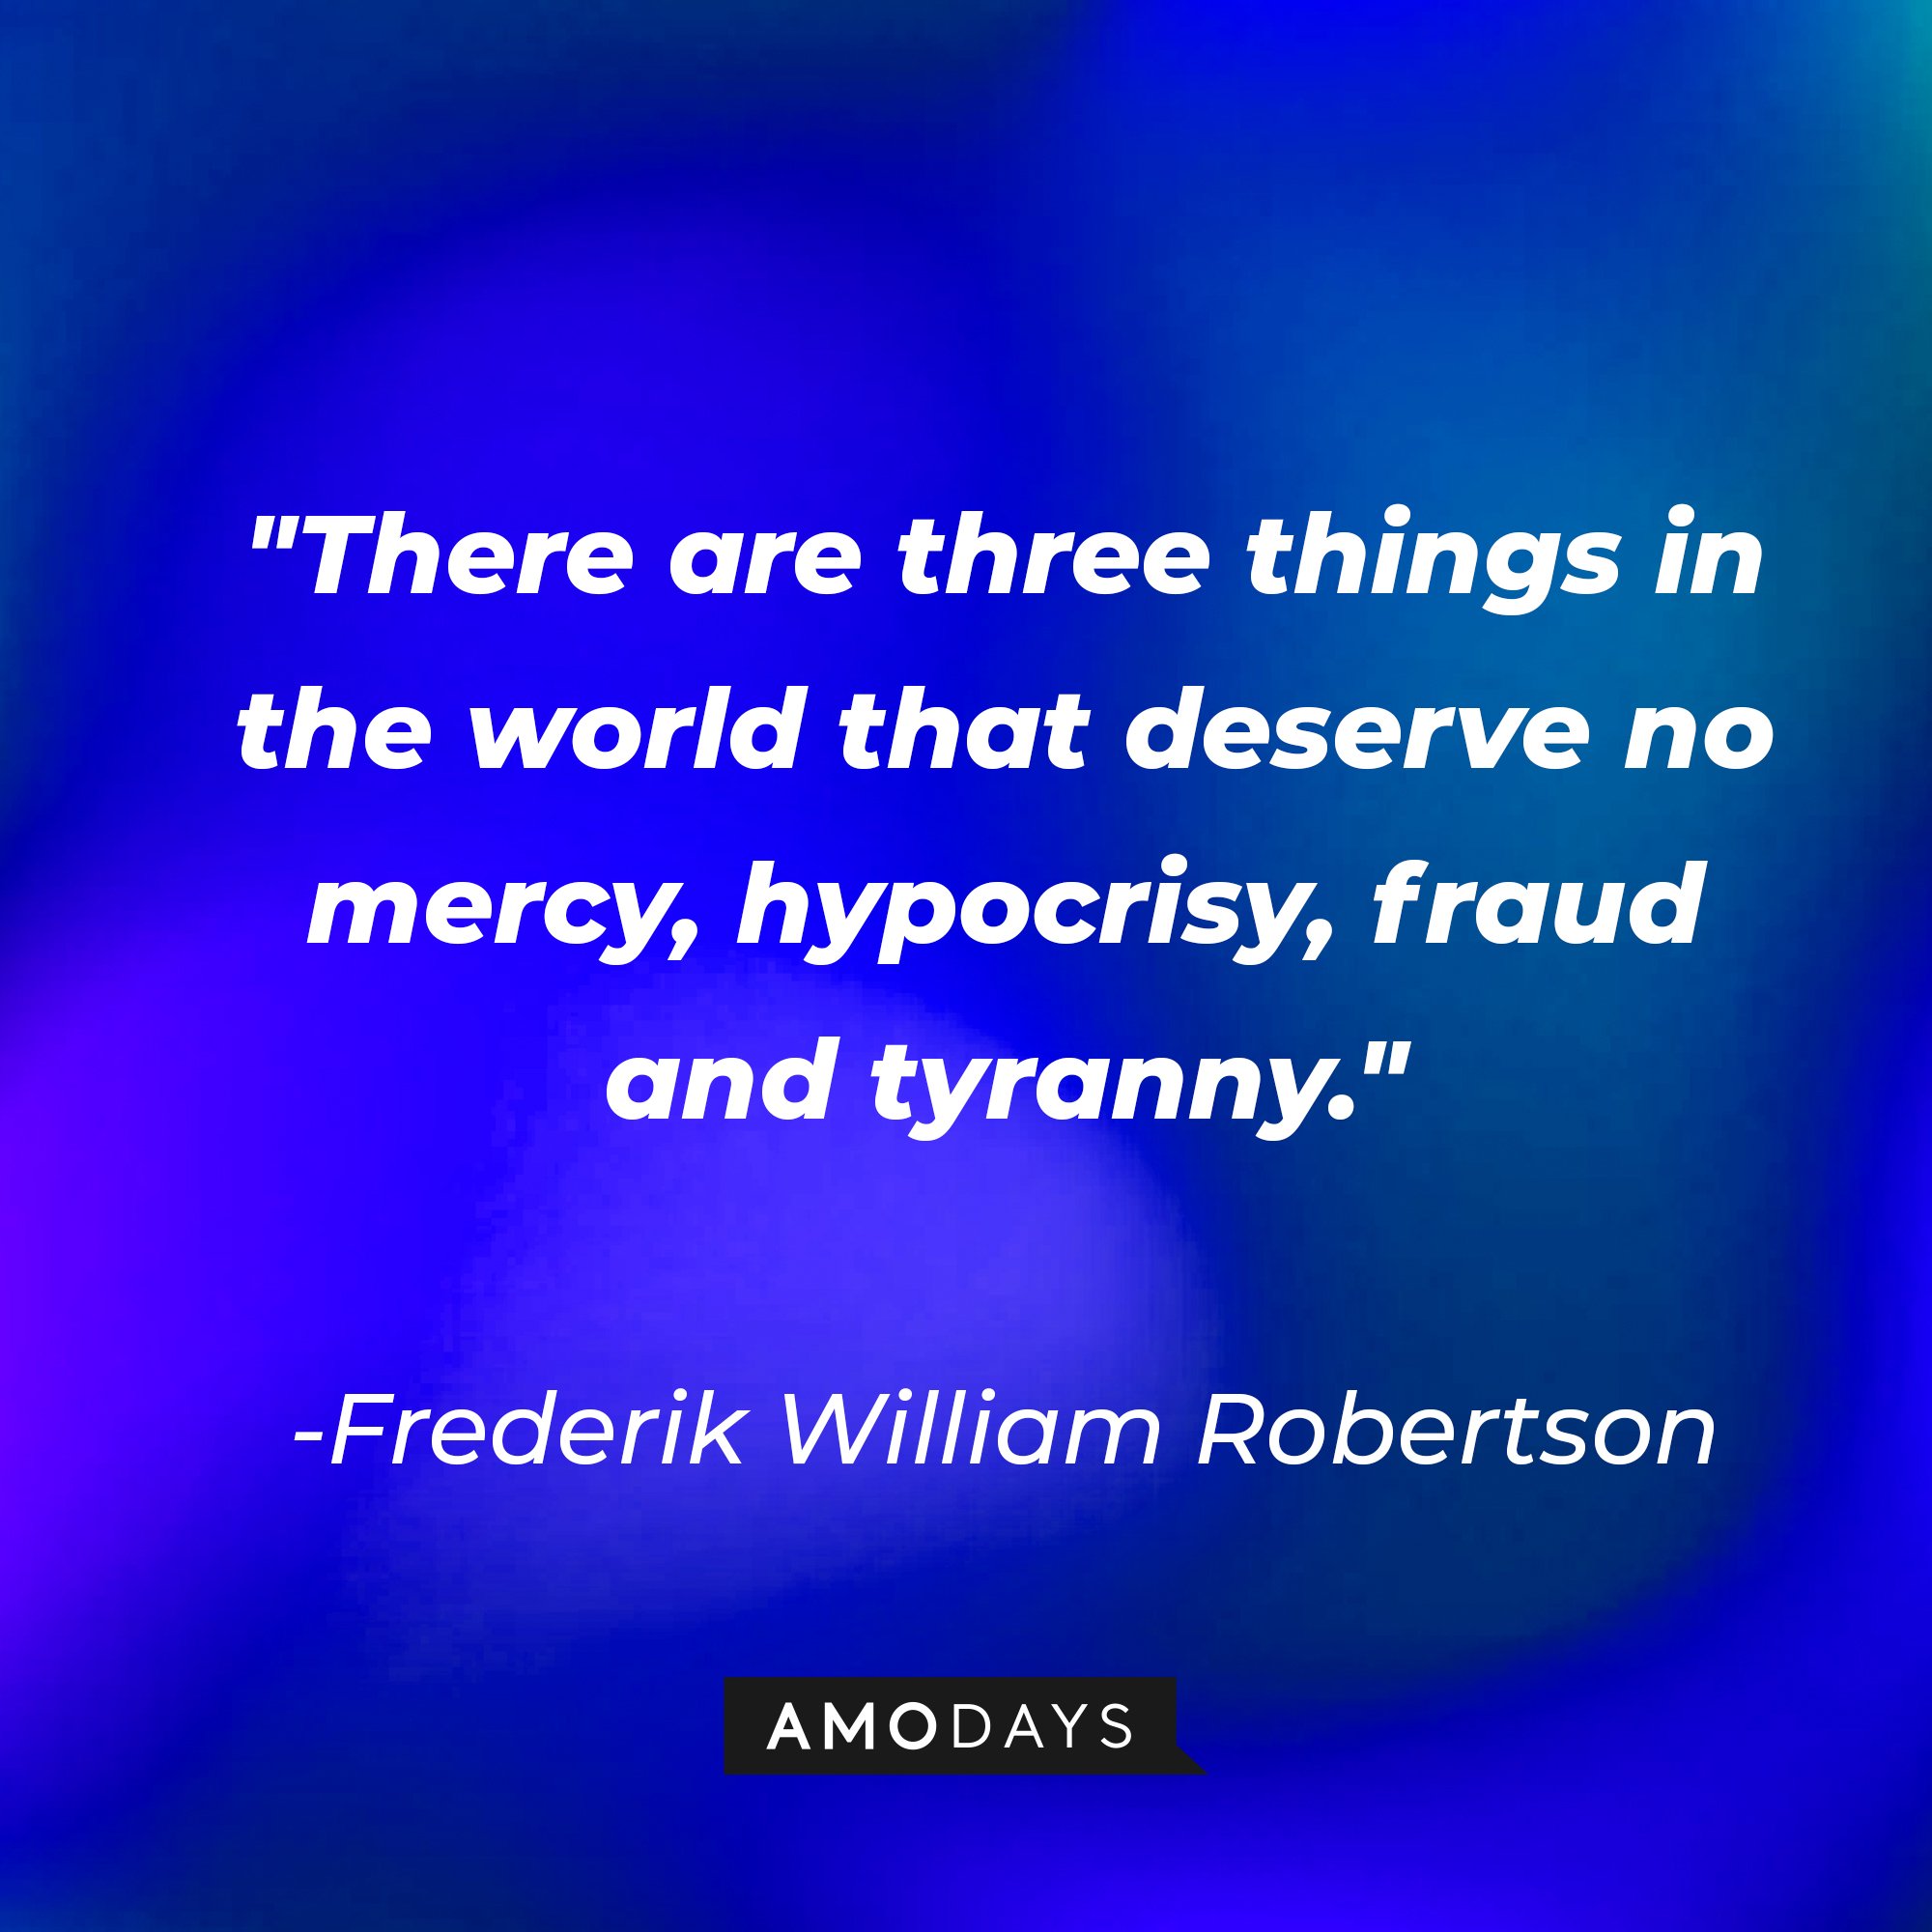 Frederik William Robertson's quote:\\\\\\\\\\\\\\\\u00a0"There are three things in the world that deserve no mercy, hypocrisy, fraud and tyranny."\\\\\\\\\\\\\\\\u00a0| Image: AmoDays